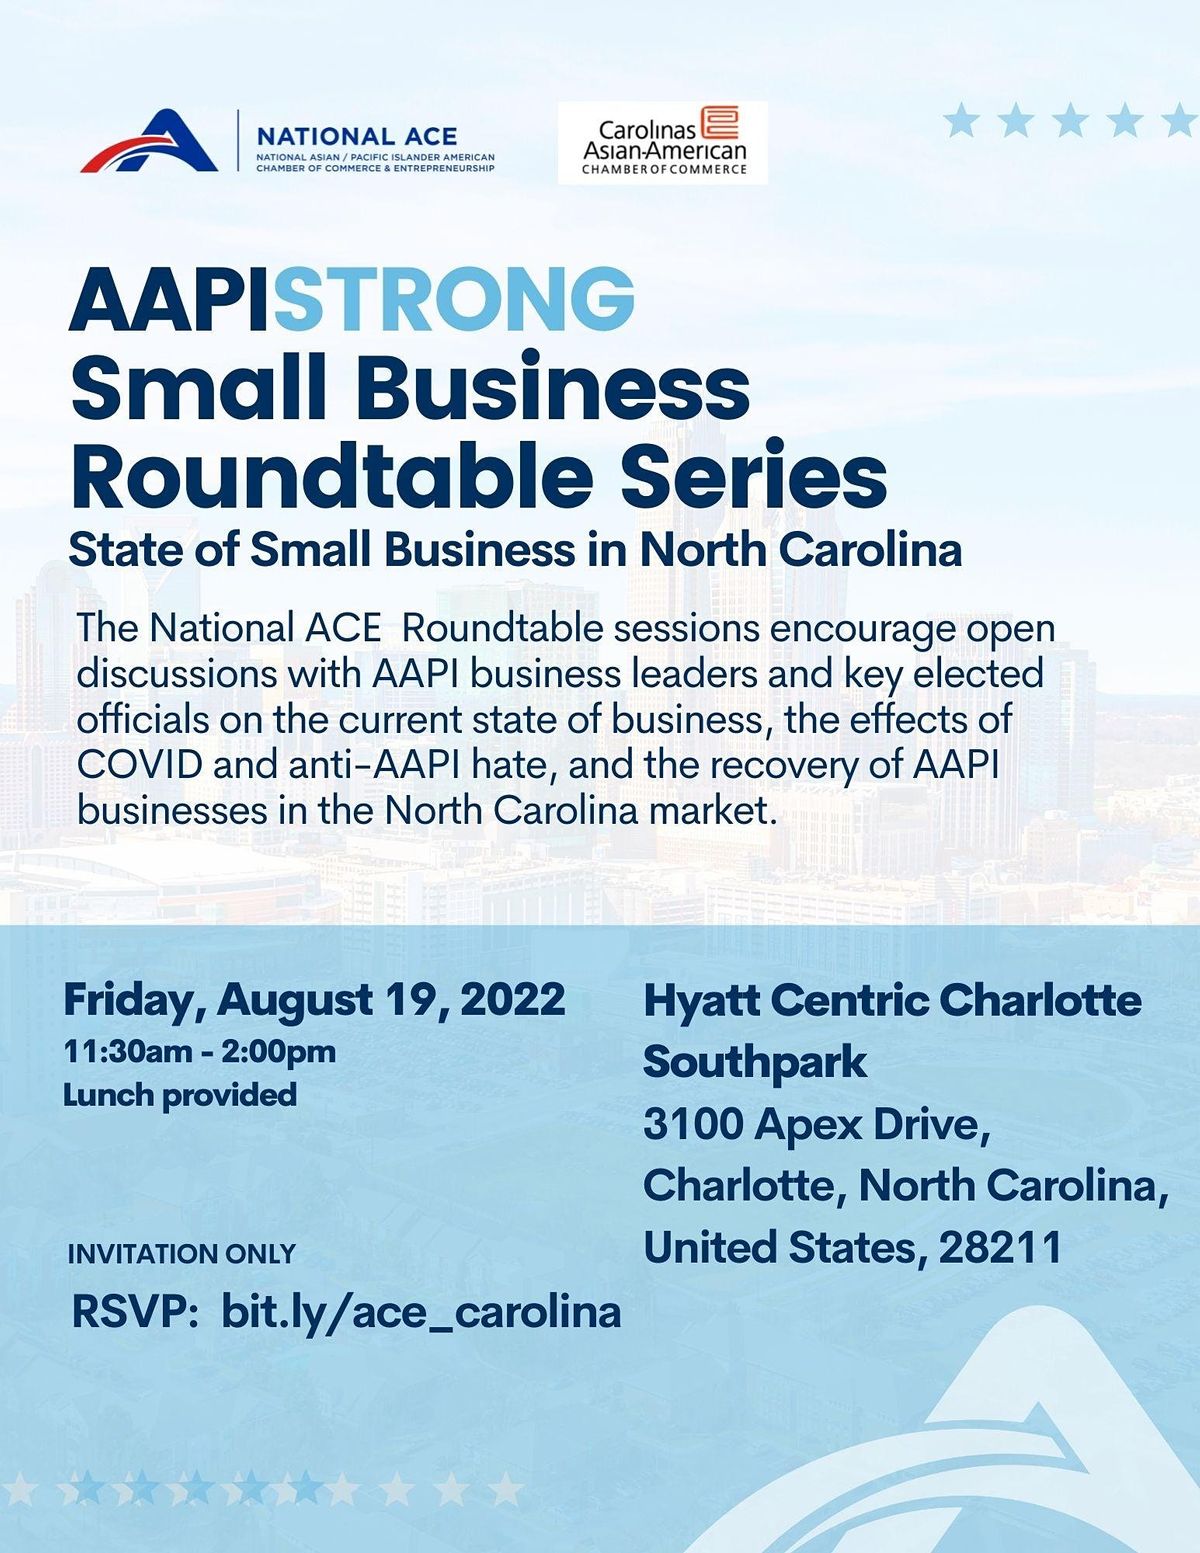 AAPISTRONG Small Business Roundtable North Carolina